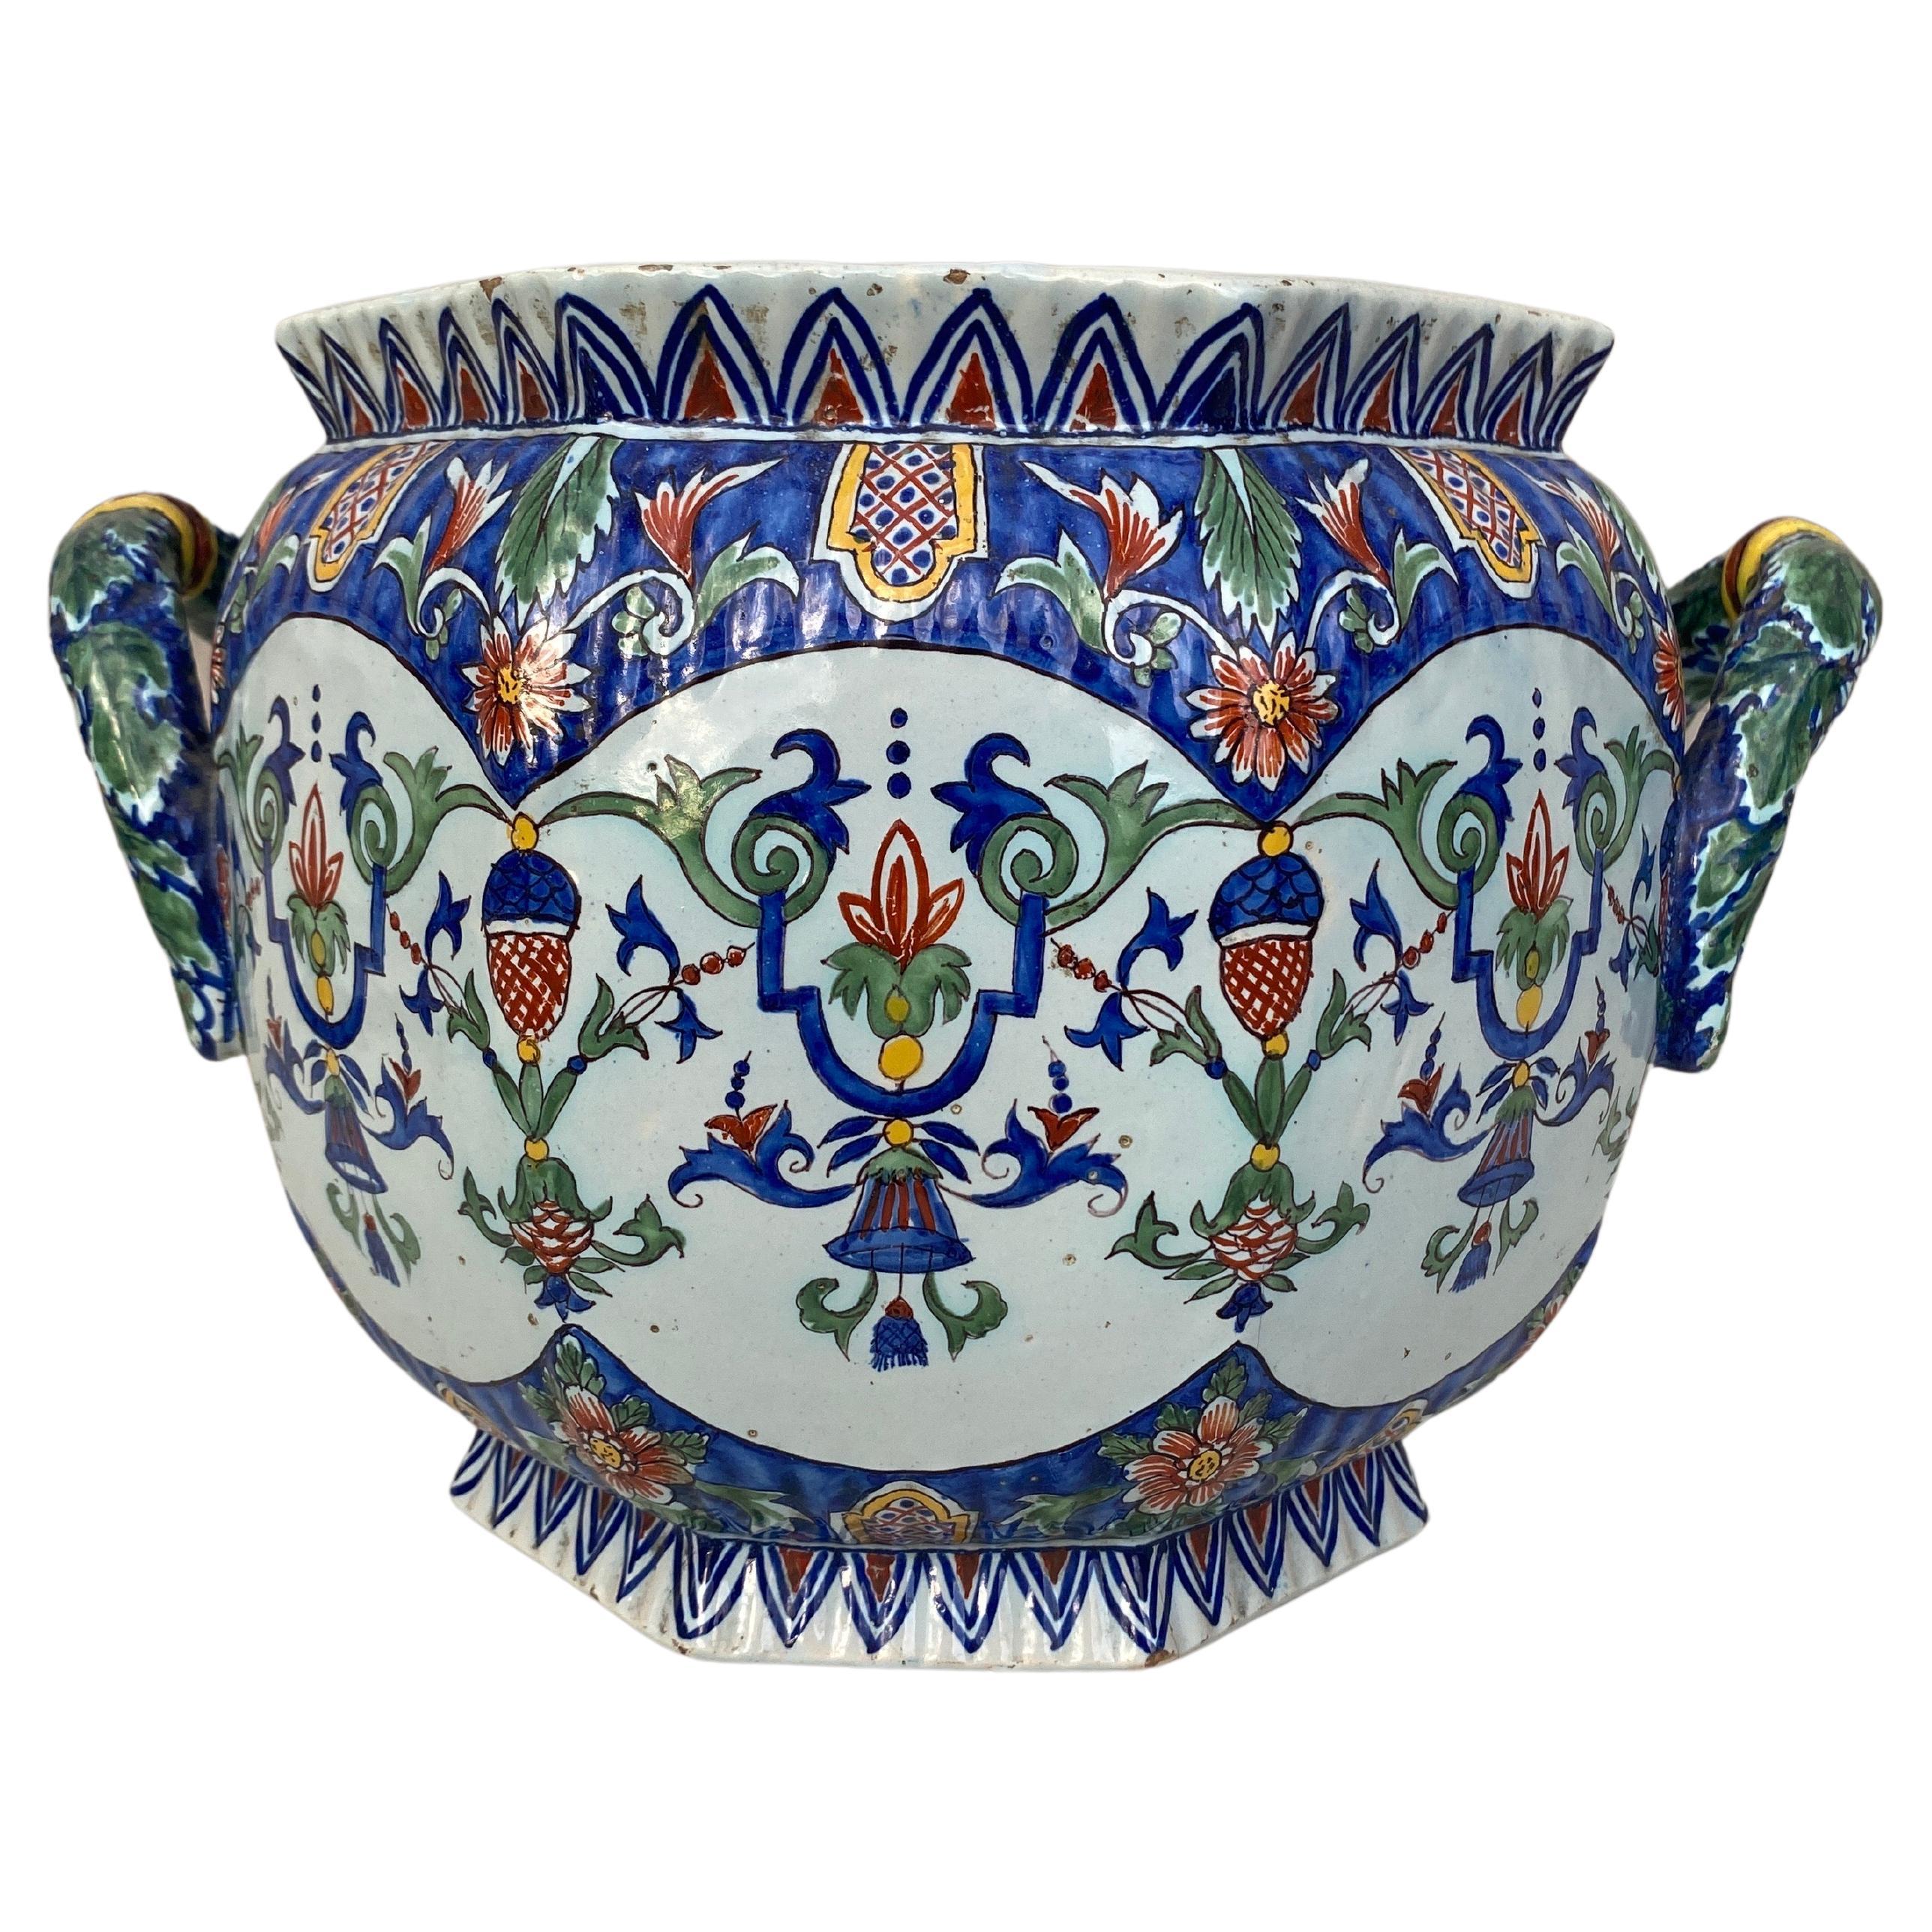 19th Century Large French Faience Cachepot Fourmaintraux Desvres